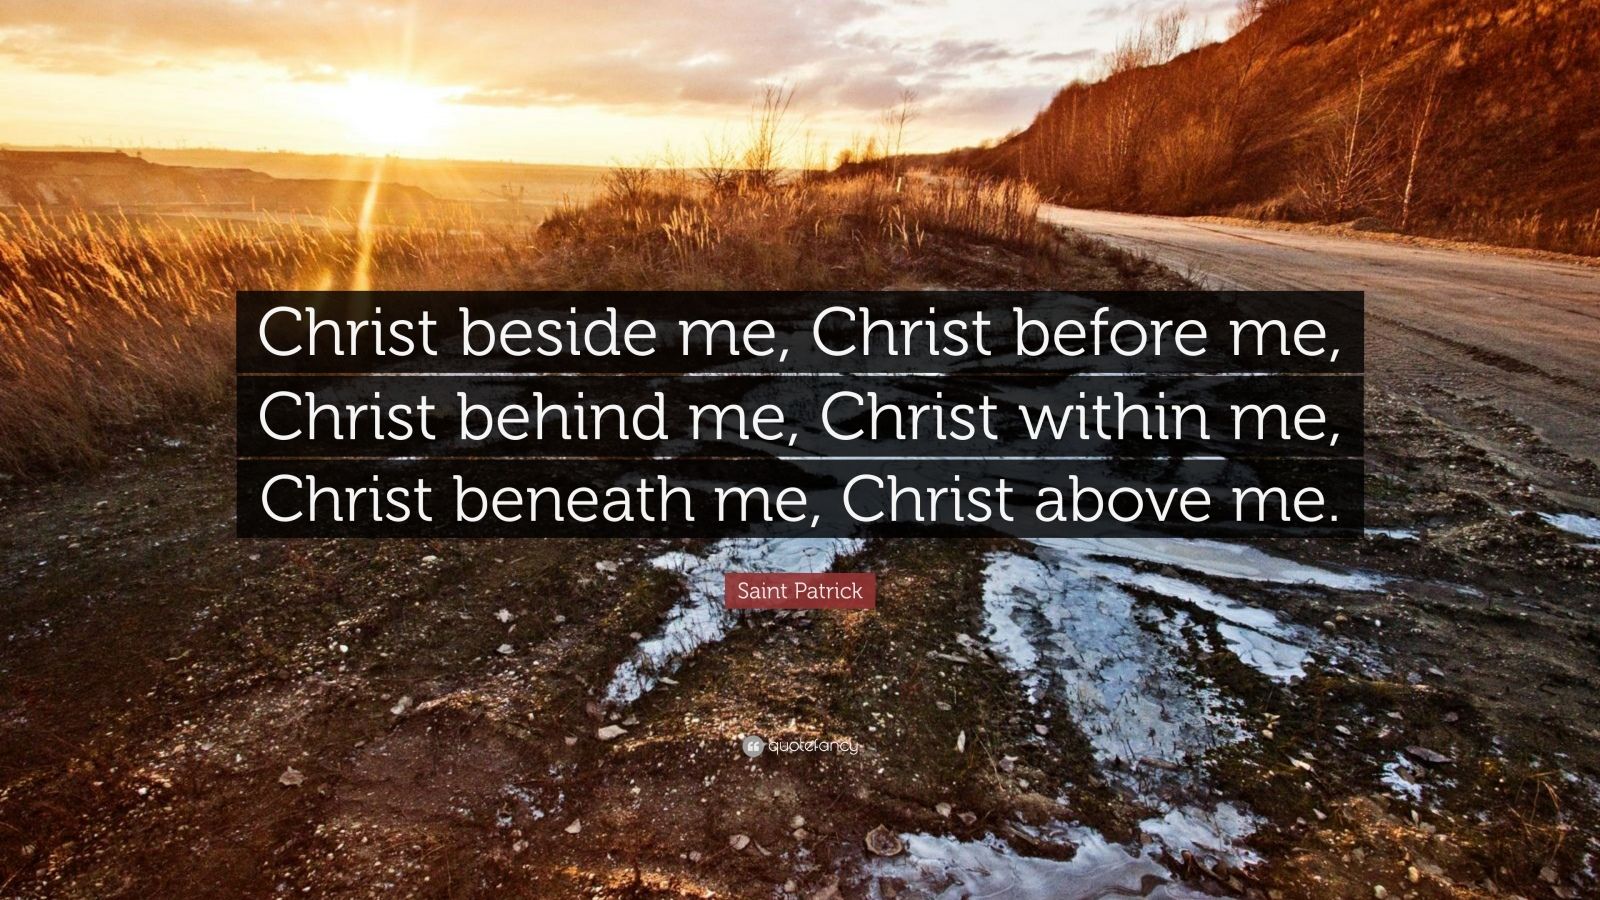 Saint Patrick Quote: “Christ beside me, Christ before me, Christ behind ...